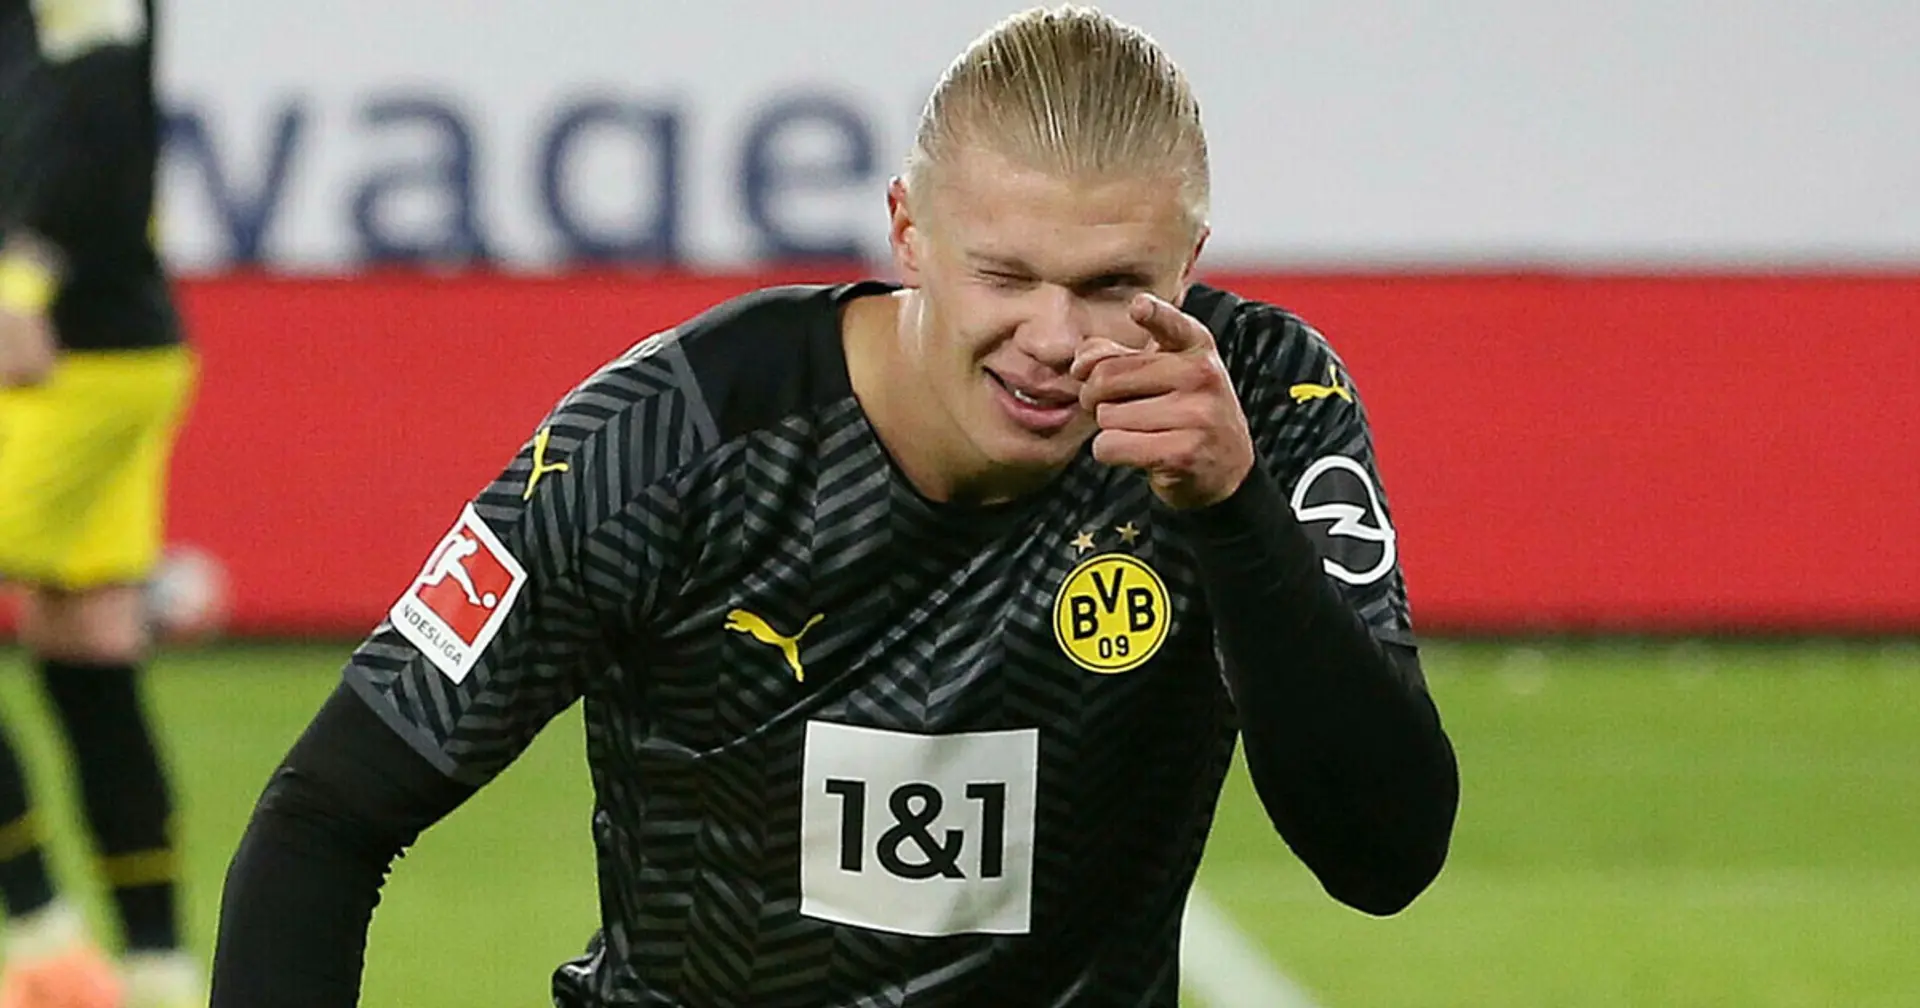 Erling Haaland sets Bundesliga record with goal after return from injury